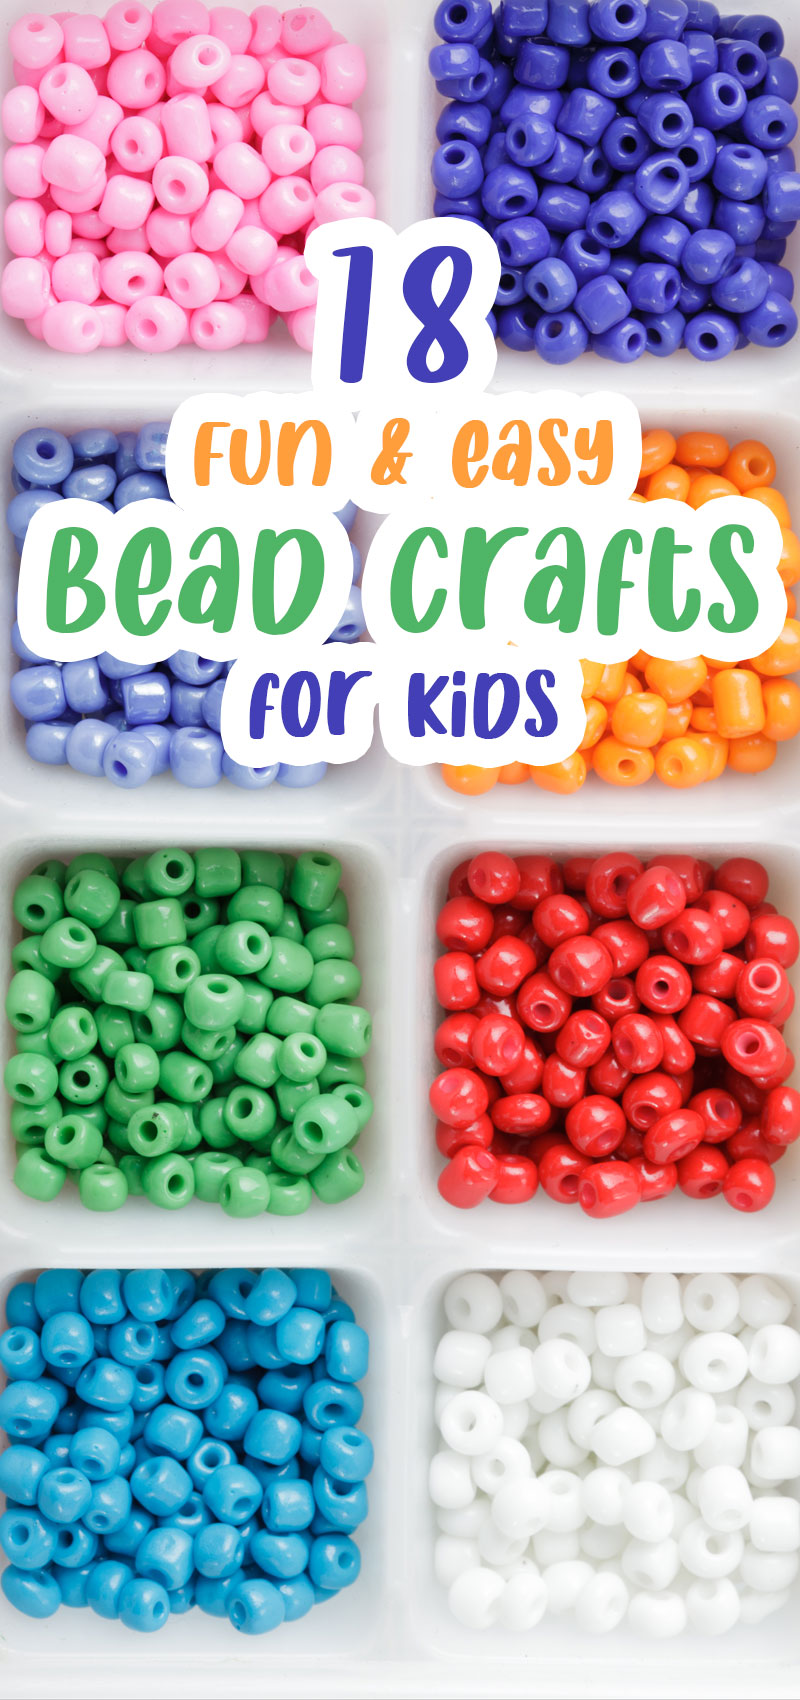 Bead Crafts for Kids * Moms and Crafters